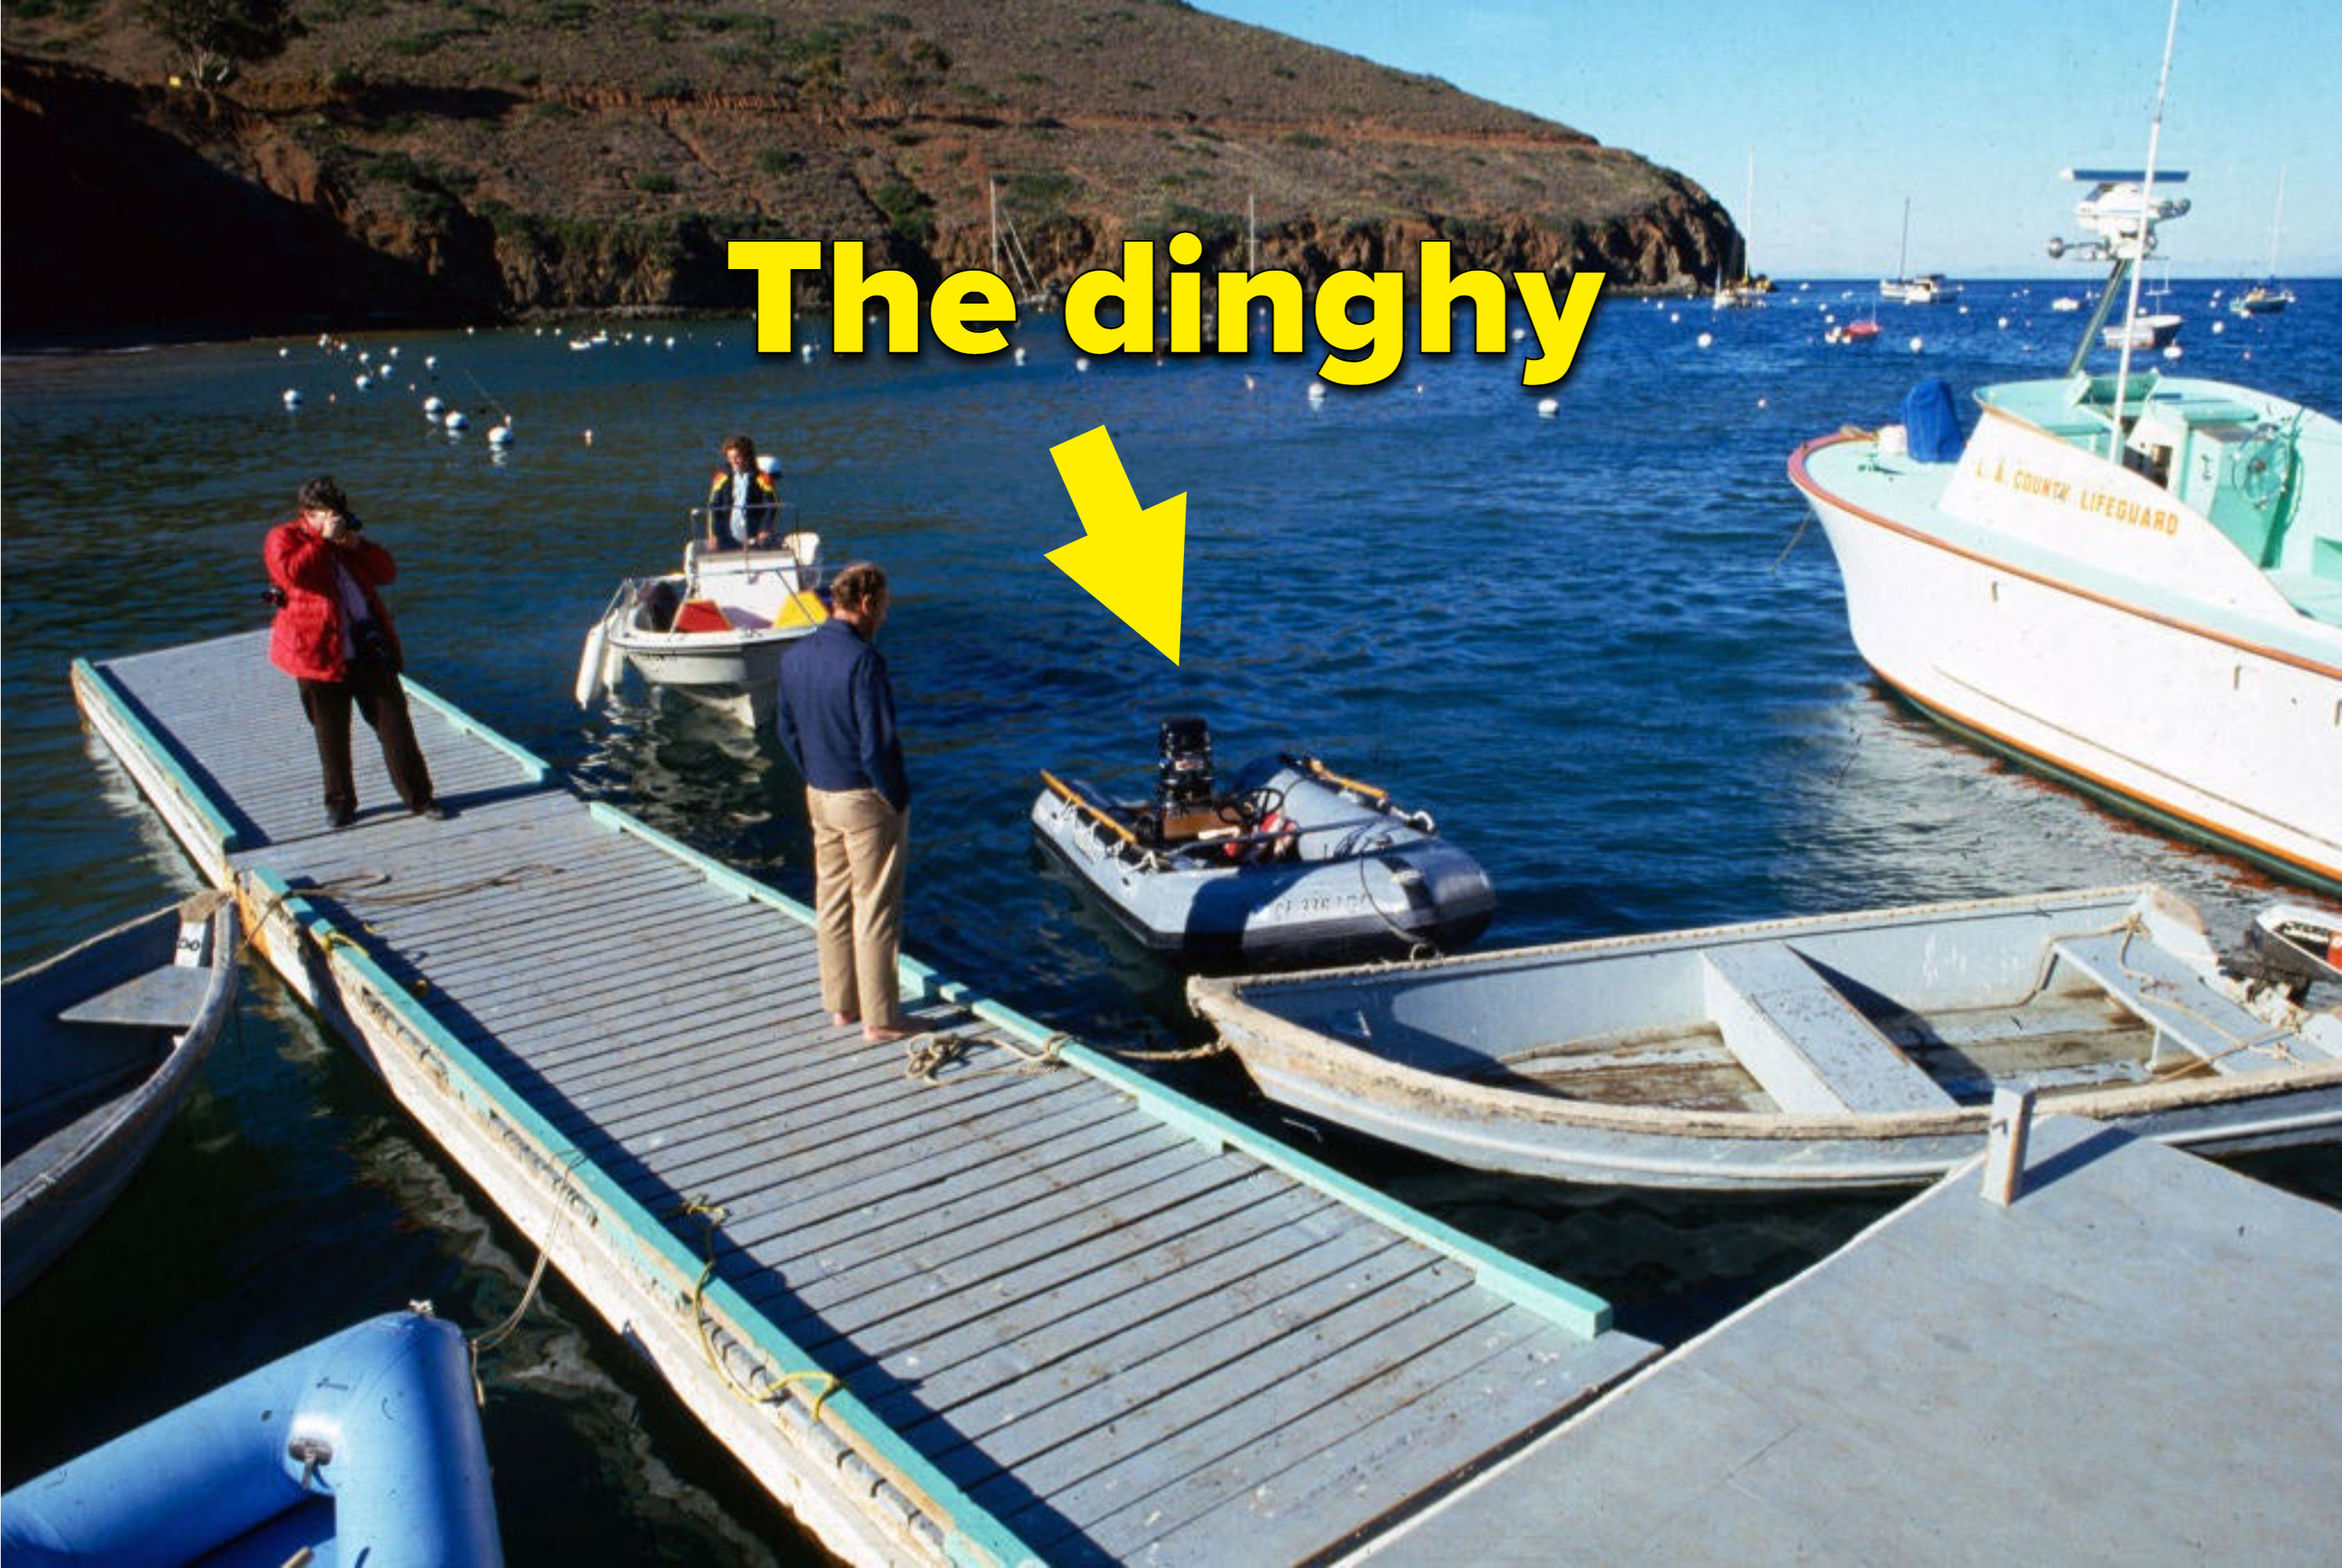 Thee dinghy in question in the water near catalina